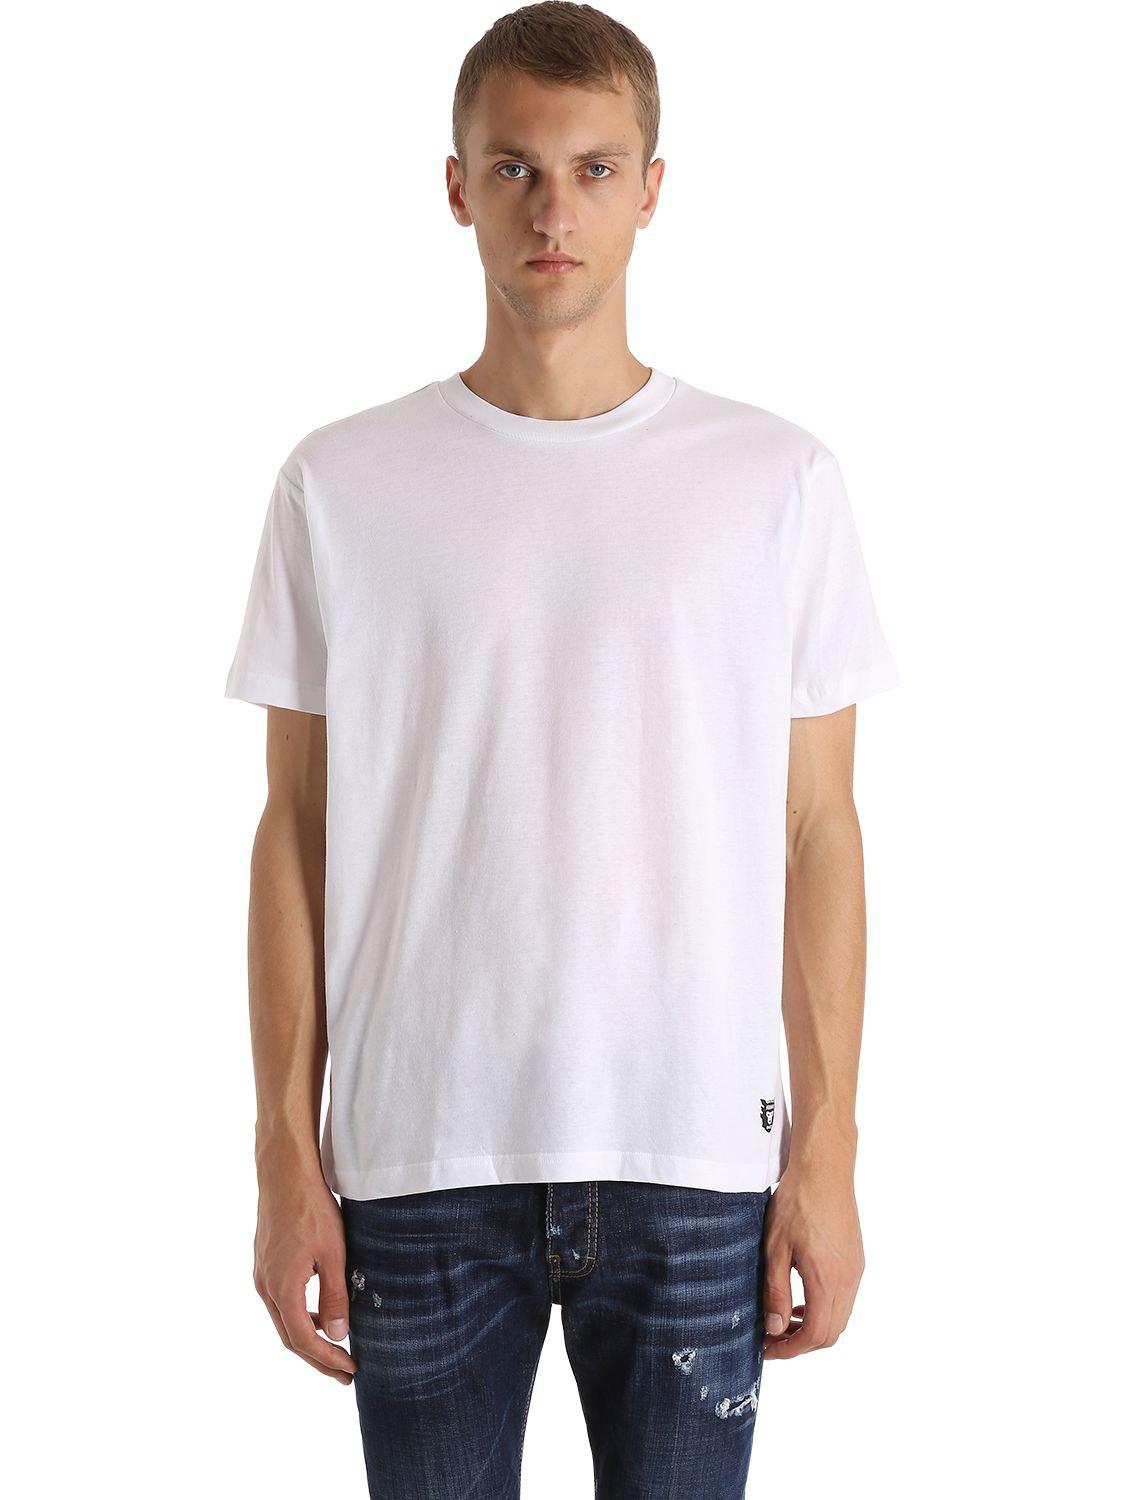 Human Made 3 Pack Cotton T-shirt in White for Men - Lyst